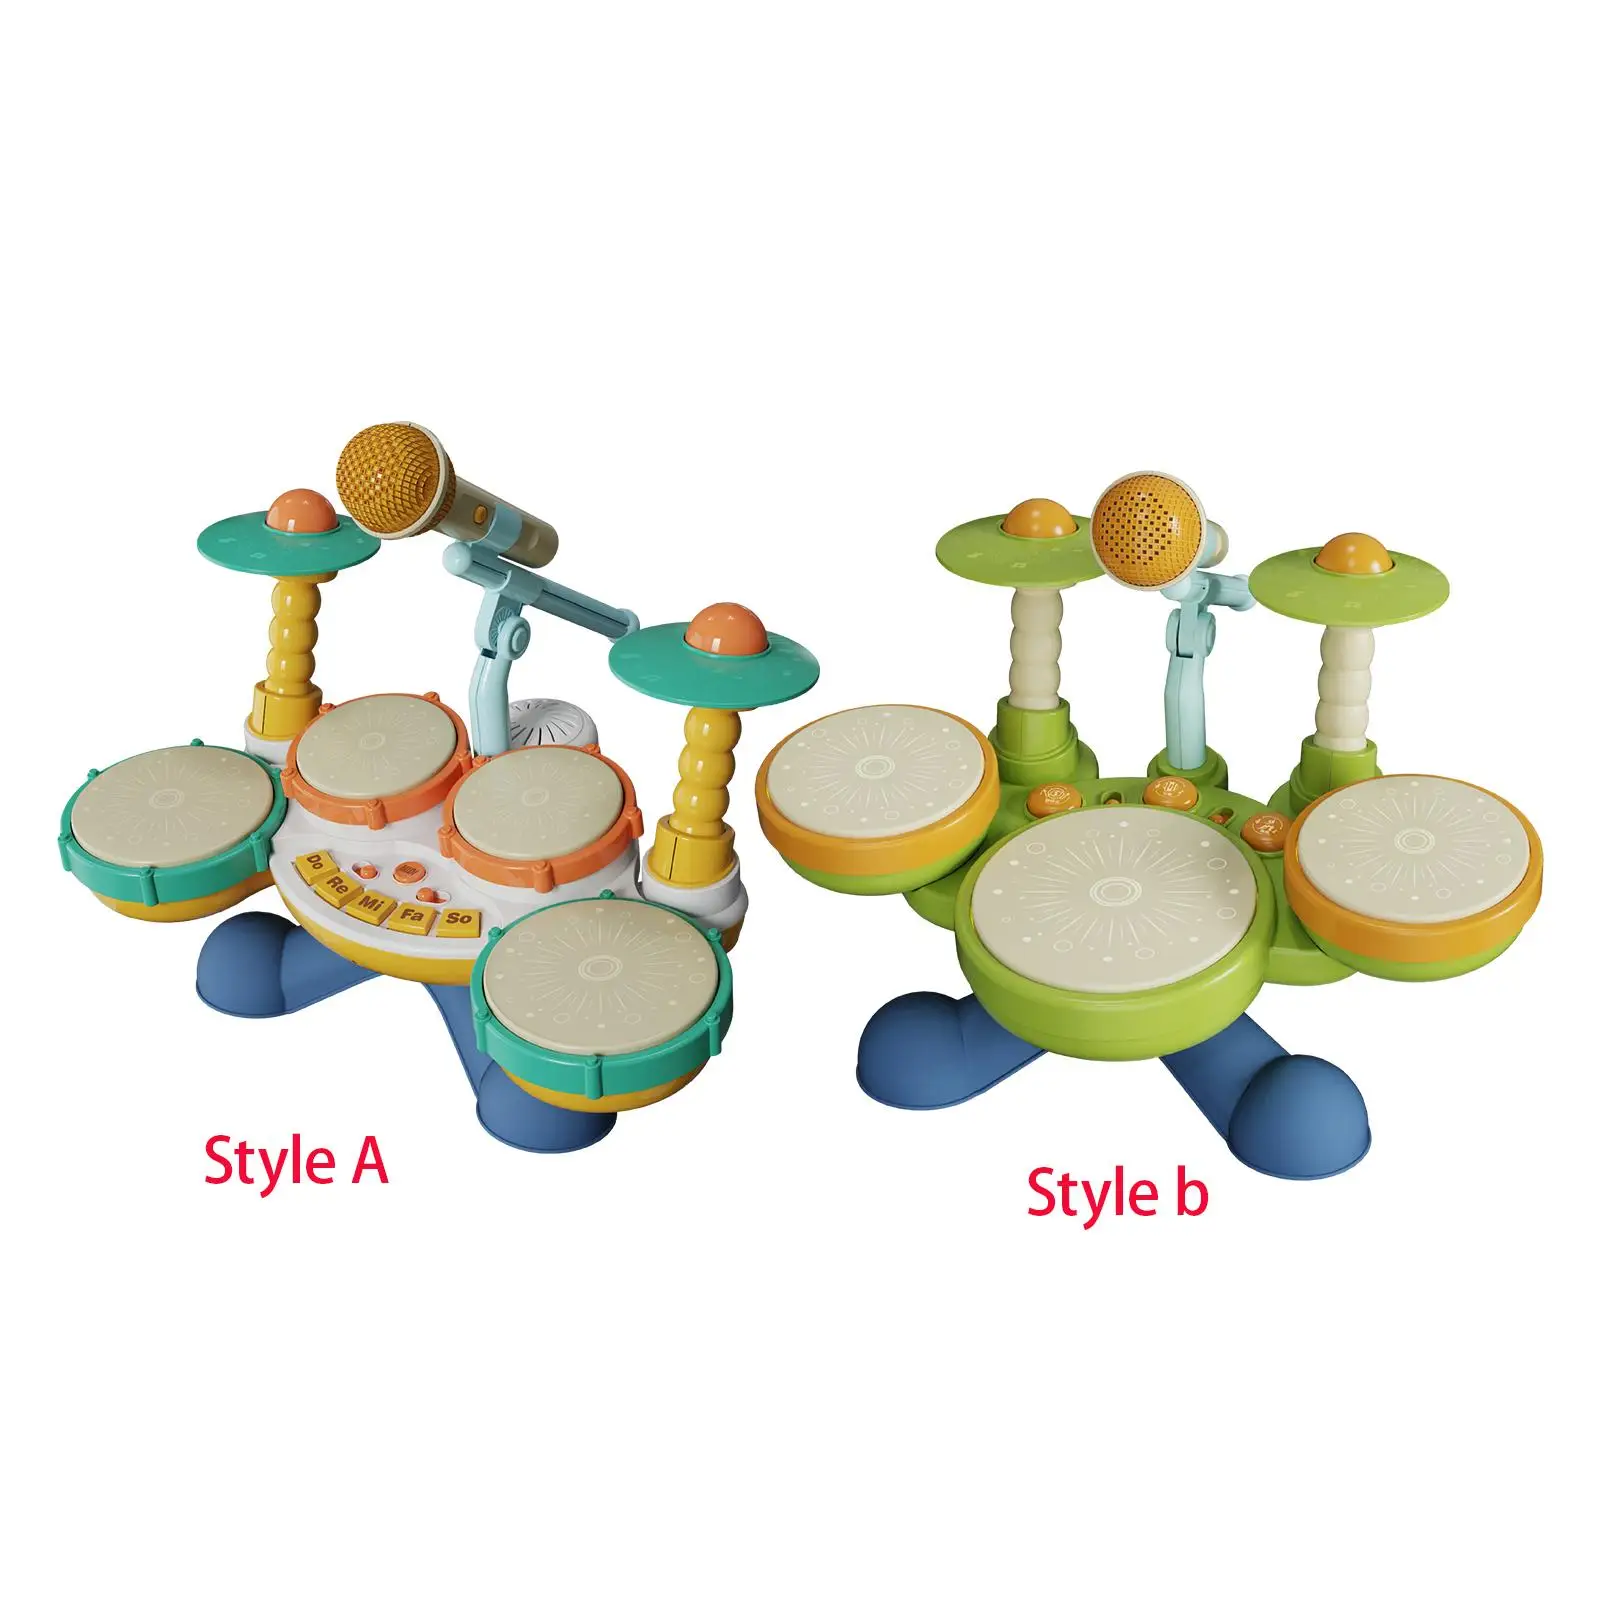 Early Educamional Toys Birthday Gift Learning Light up Toy Musical Drum Toy